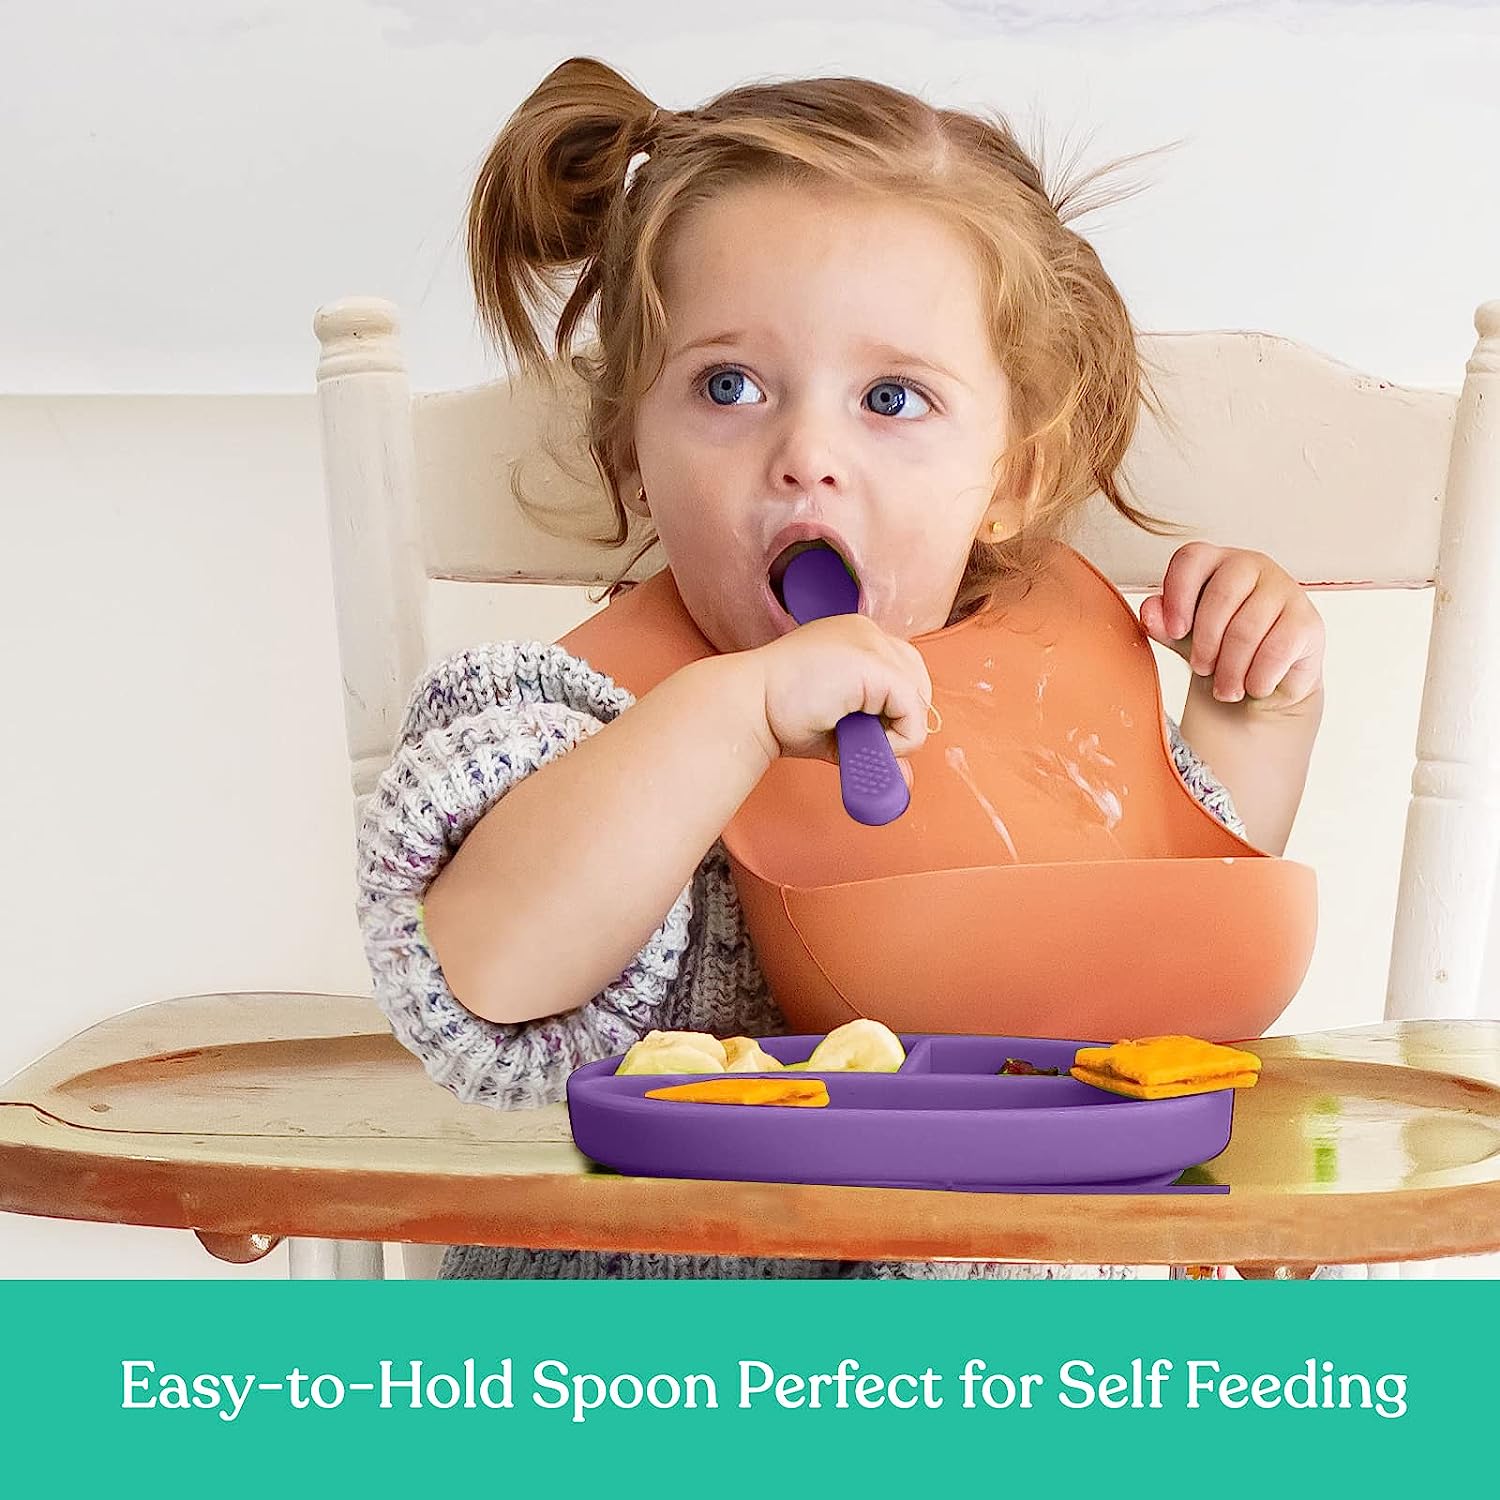 Baby Feeding Set, BPA free, Food Grade Silicone Dinner Plate and